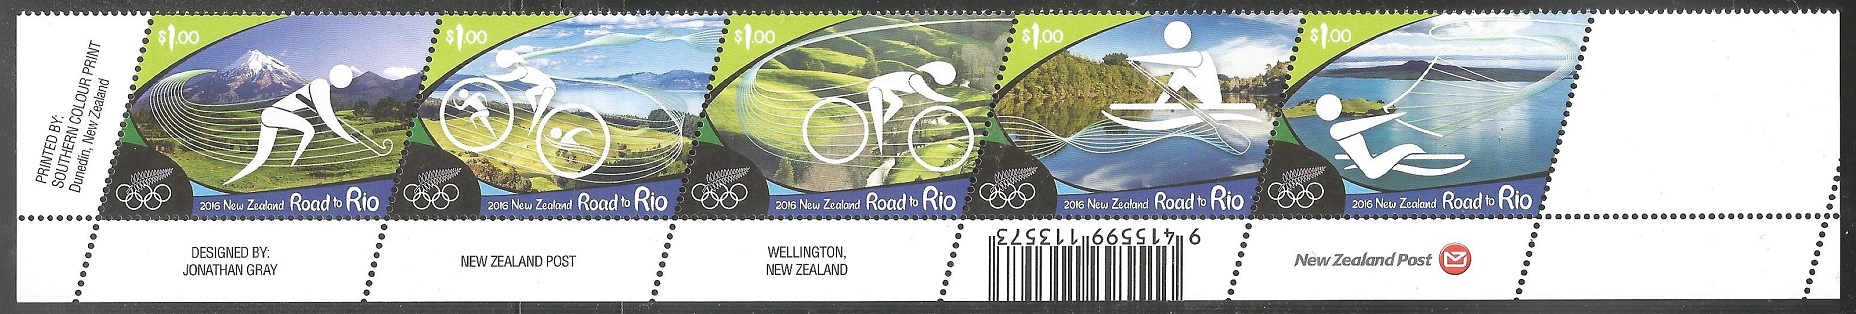 Stamp NZL 2016 July 6th Road to Rio strip of five stamps